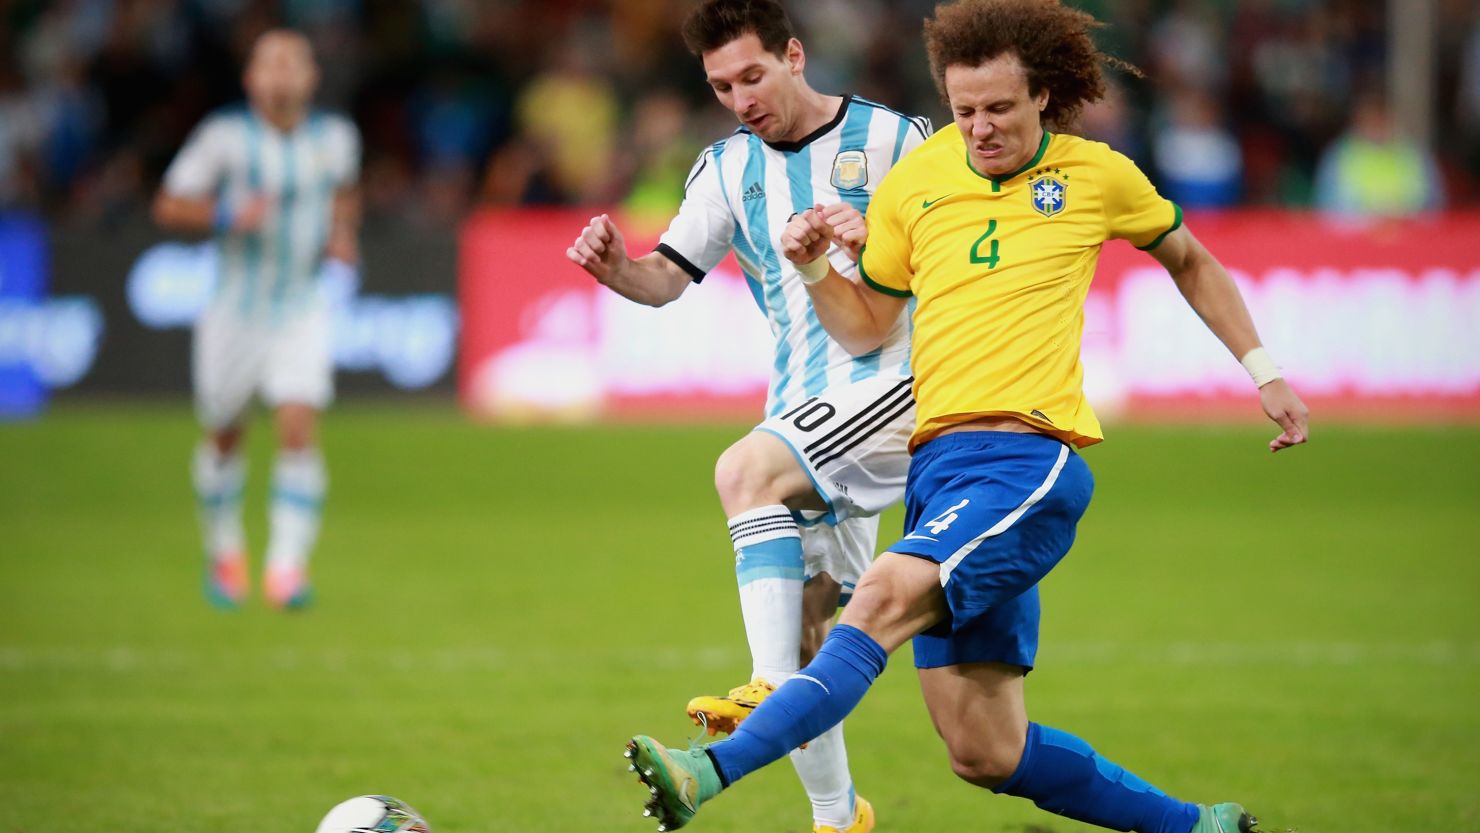 Lionel Messi (left) and David Luiz tangle for the ball as Argentina face Brazil in a freindly Beijing.